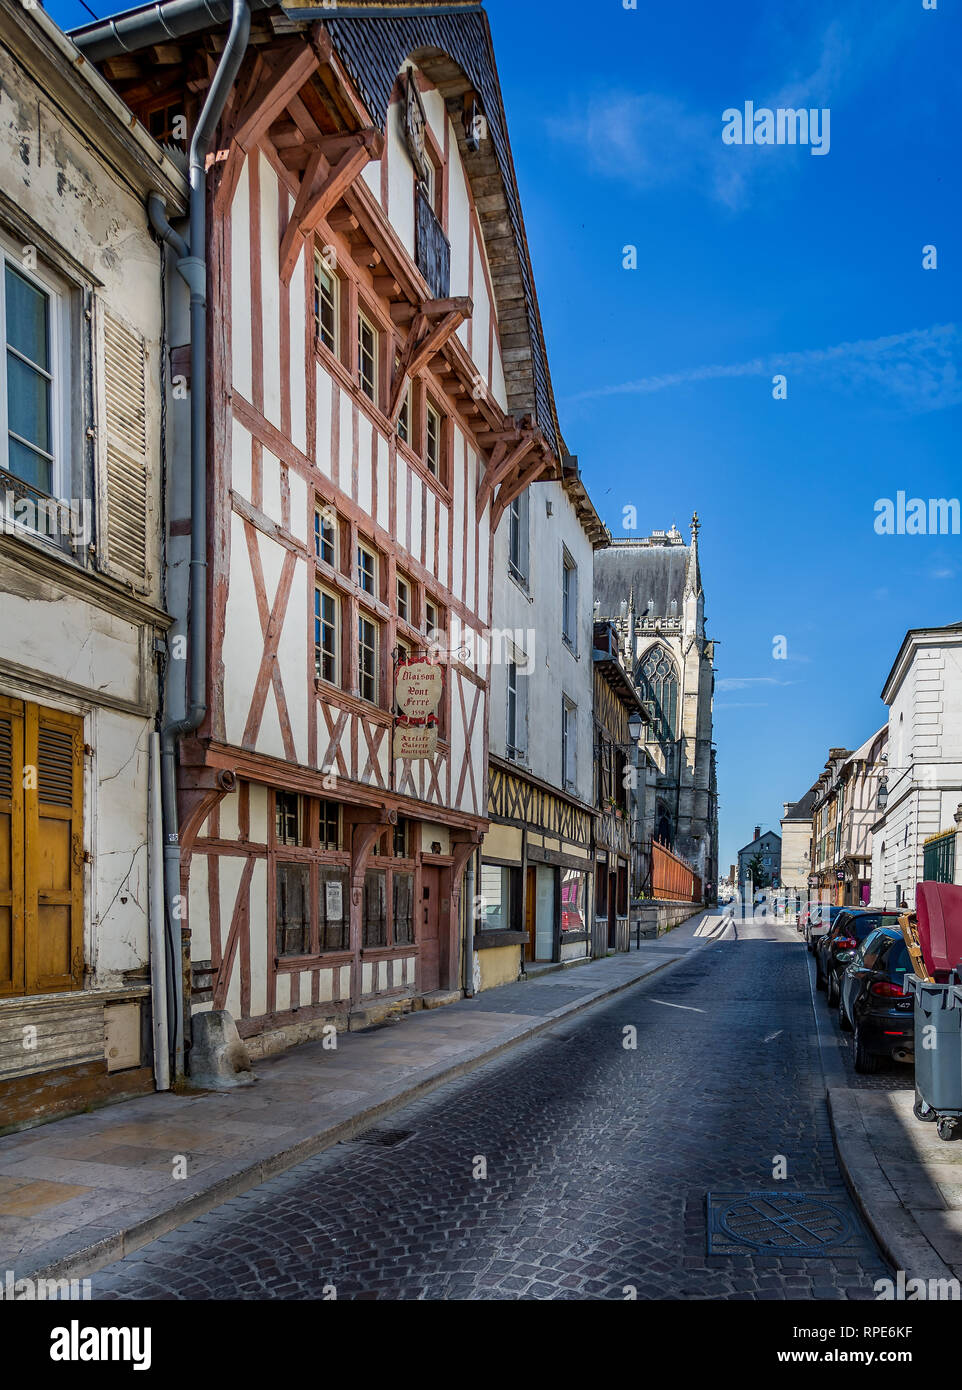 Medieval Troyes cobbled street with timber framed buildings in Troyes, France on 8 June 2015 Stock Photo